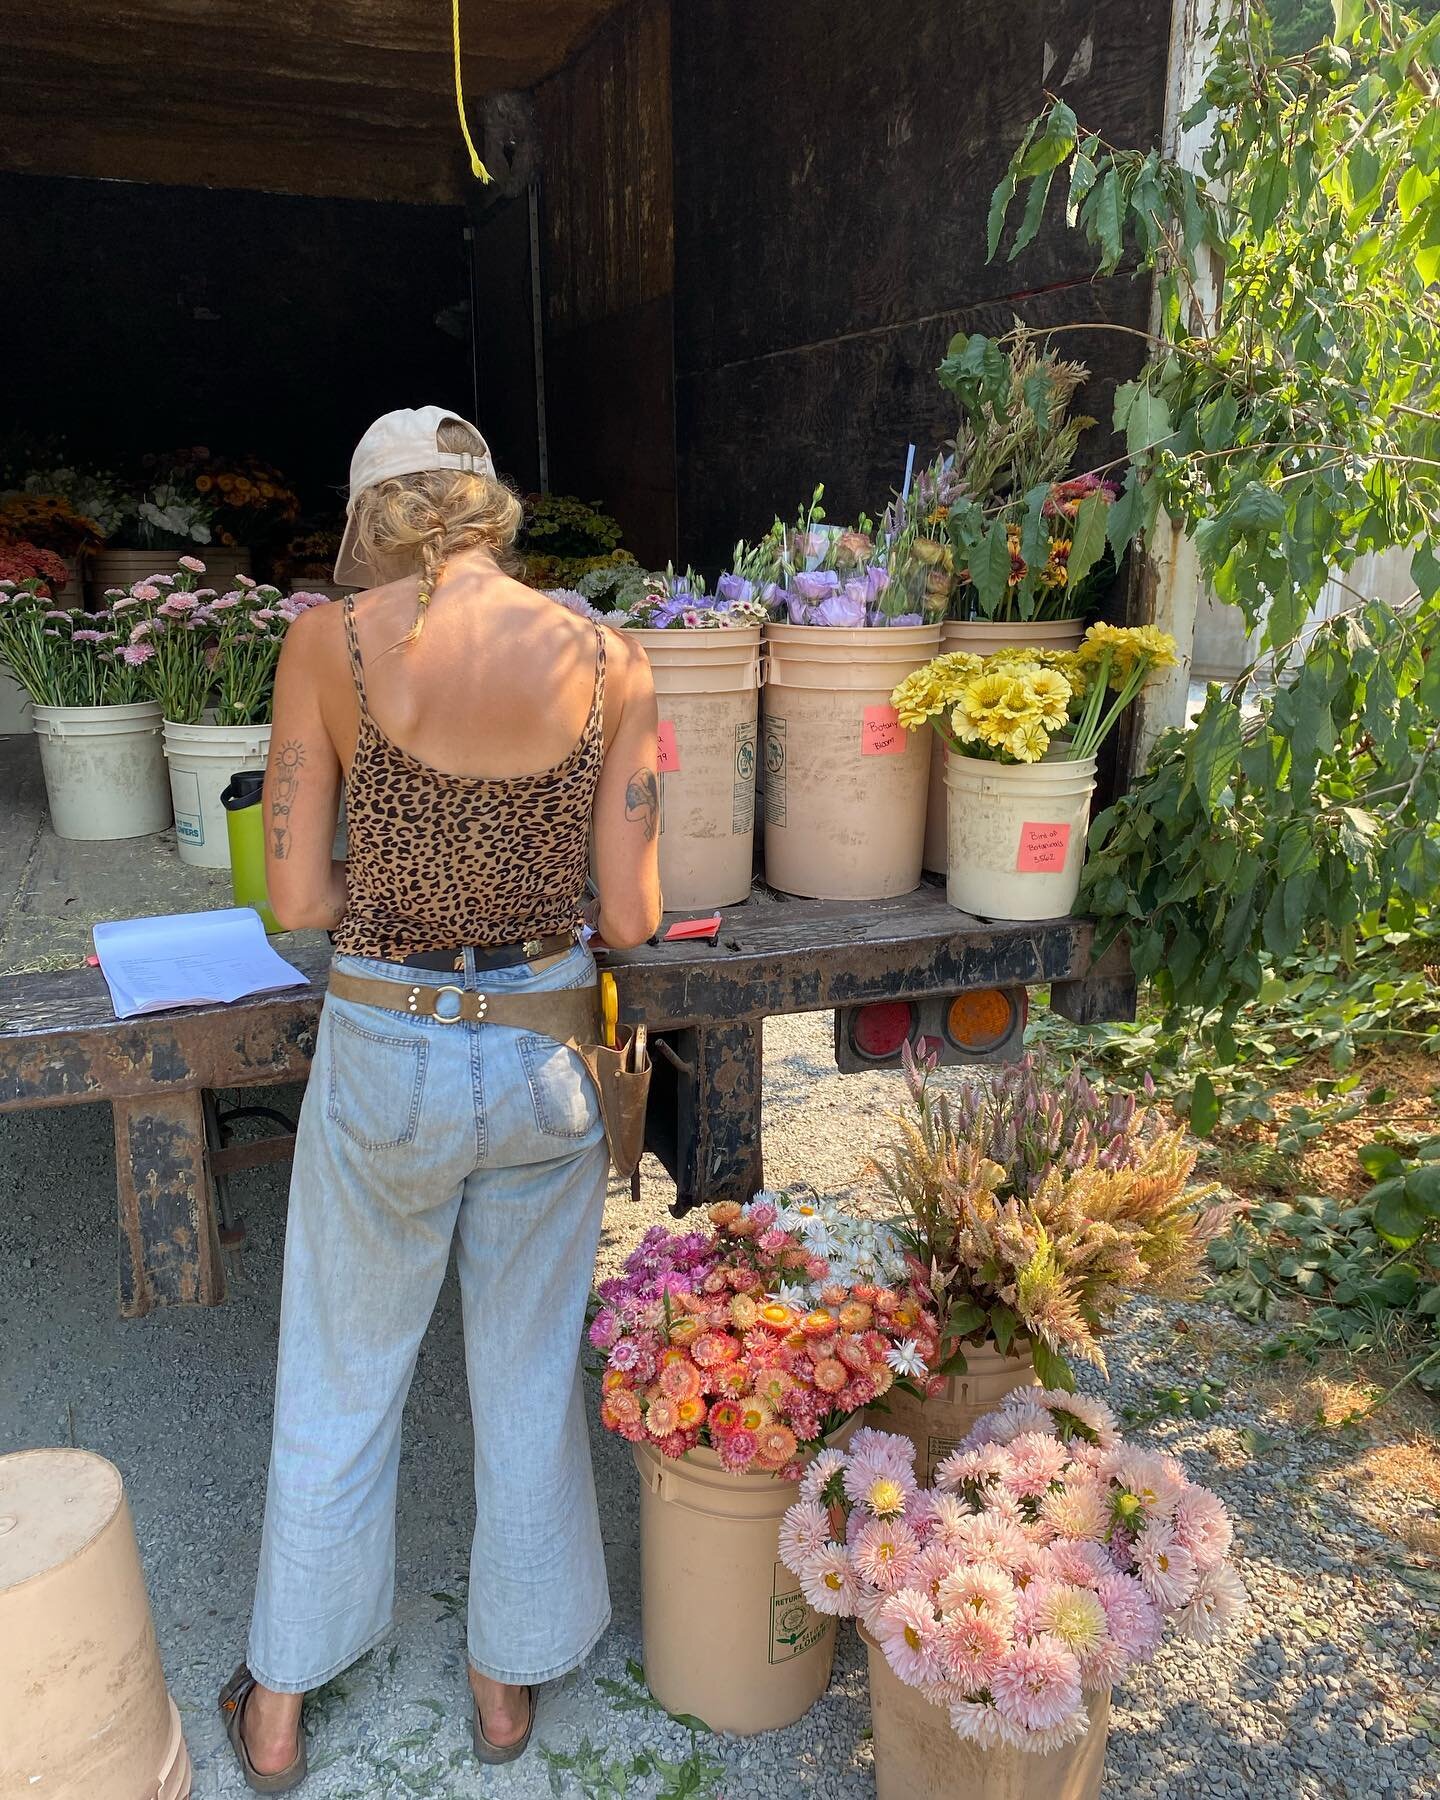 No truck drama this week!
We are making two runs to Vancouver to accommodate all our blooms - find our flowers on Tuesday AND Thursday @ufgca 

A big week of picking for  @buttercup.sandwich and @joy_warrior_ 🤗